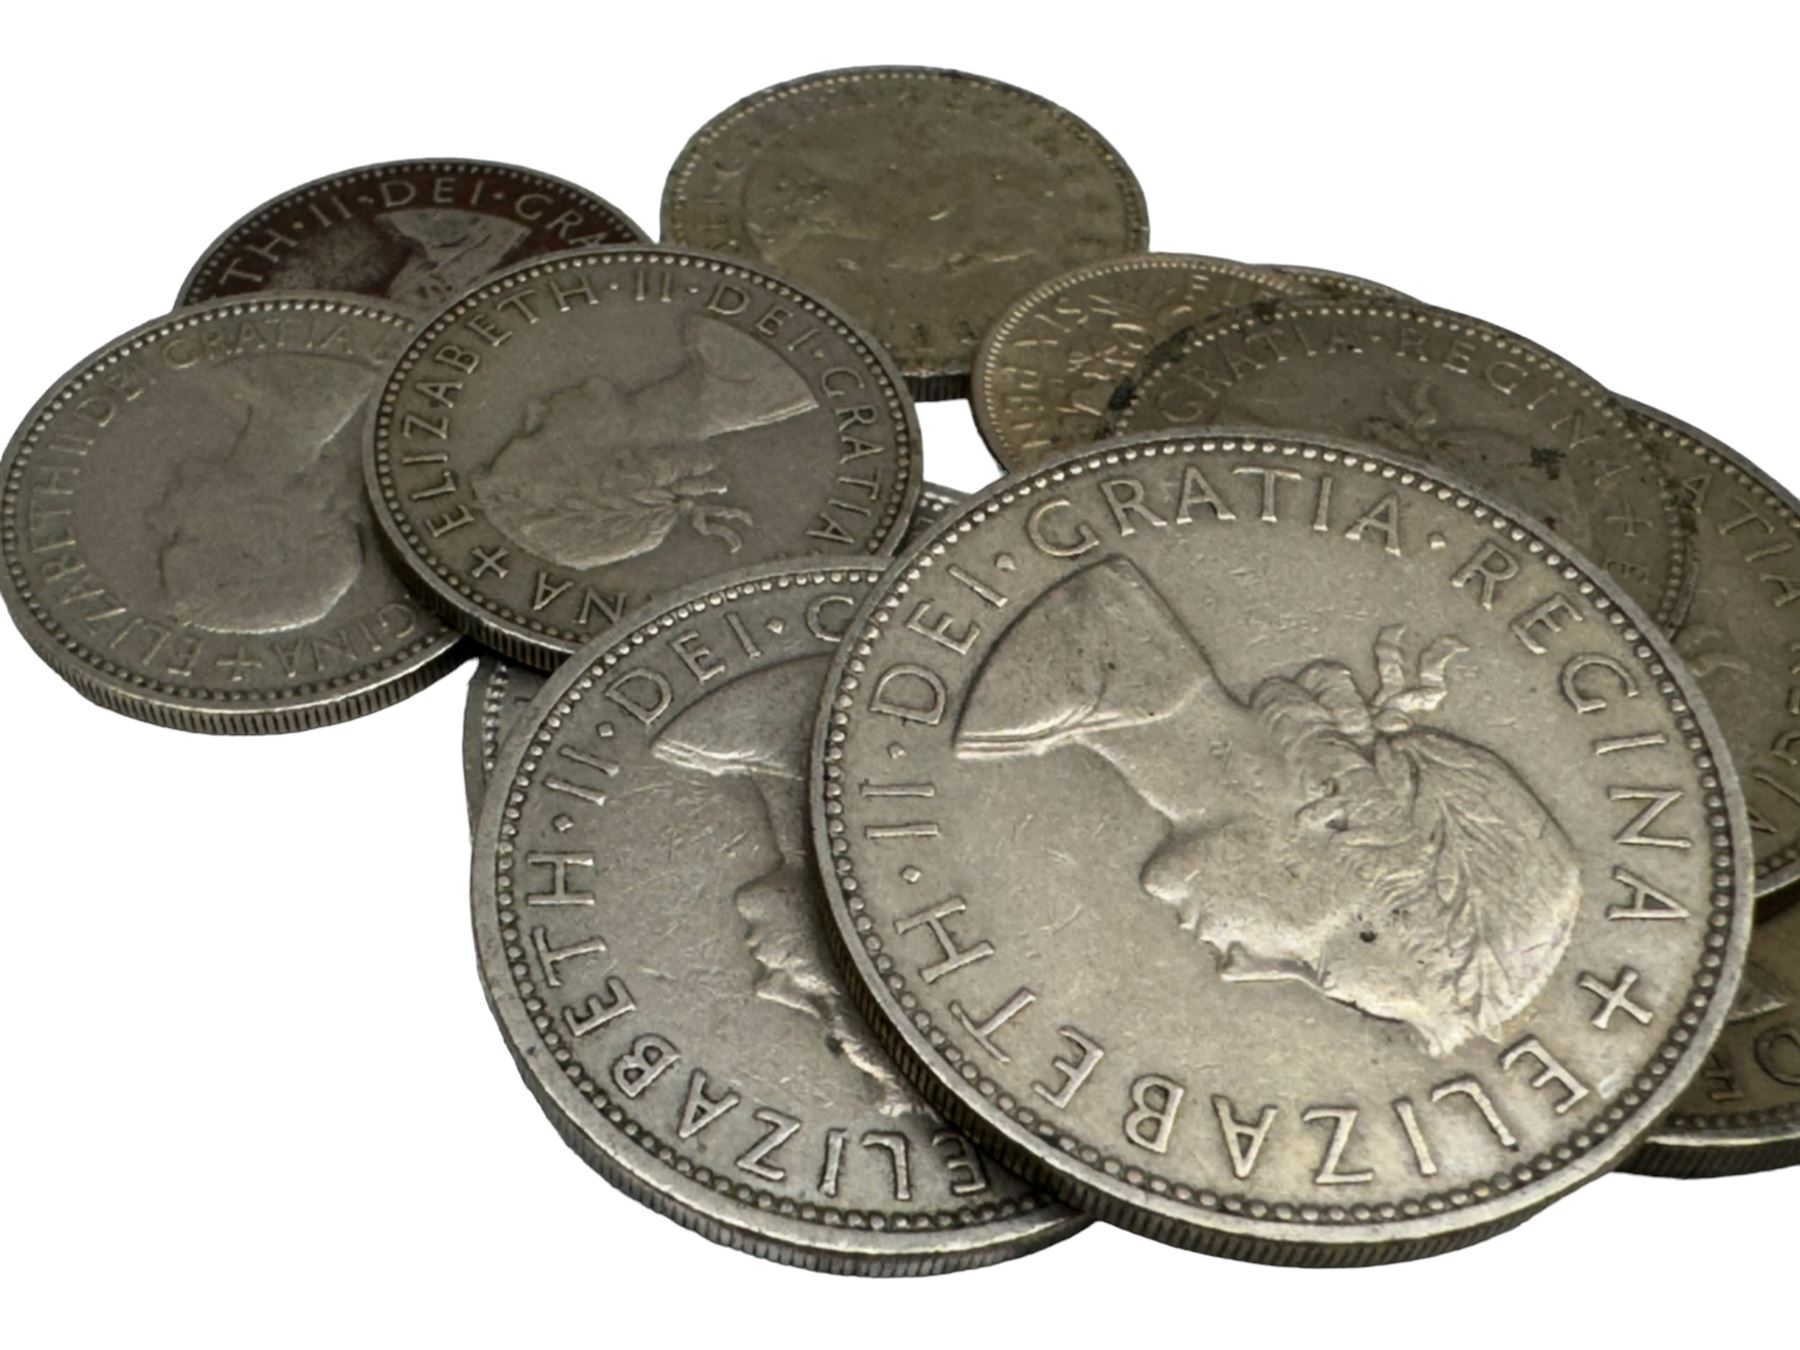 Coins including Elizabeth I 1573 sixpence and other hammered silver coins - Image 9 of 11